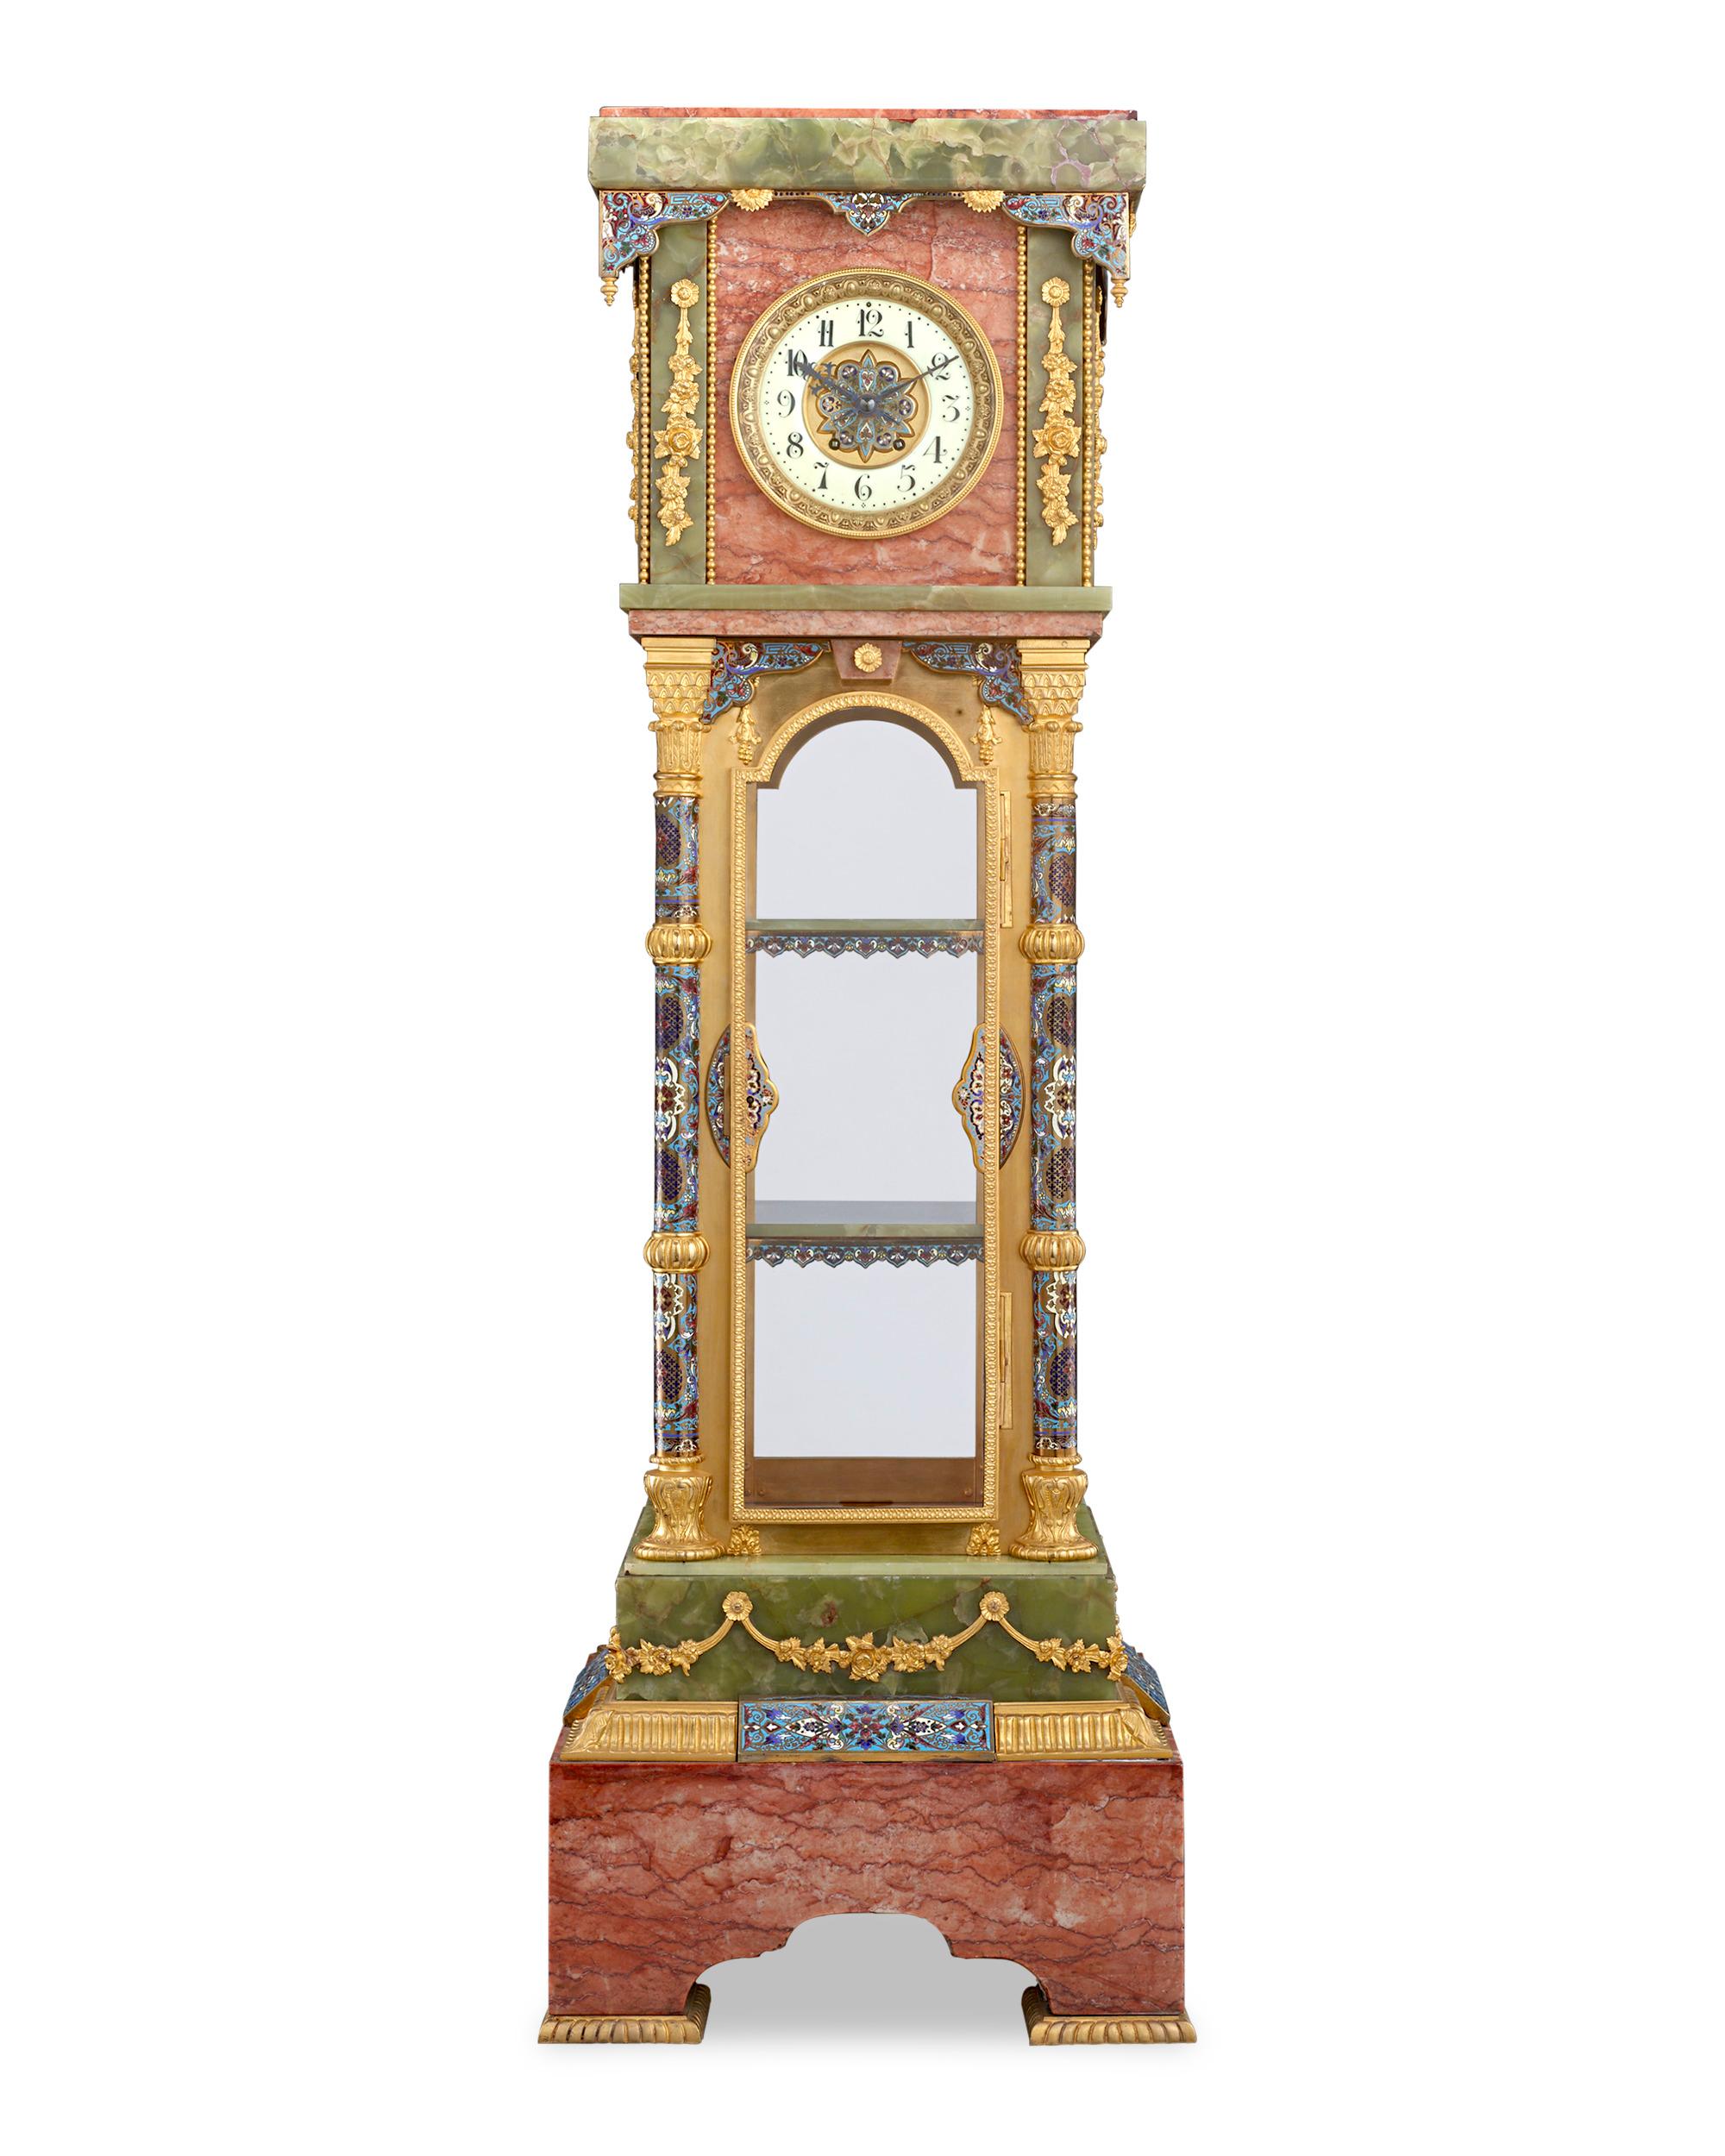 This beautiful French vitrine clock styled in the Moroccan taste is an exquisite work of artistry and craftsmanship. Featuring a clock, thermometer and barometer, no detail has been overlooked regarding its functionality, design and construction.